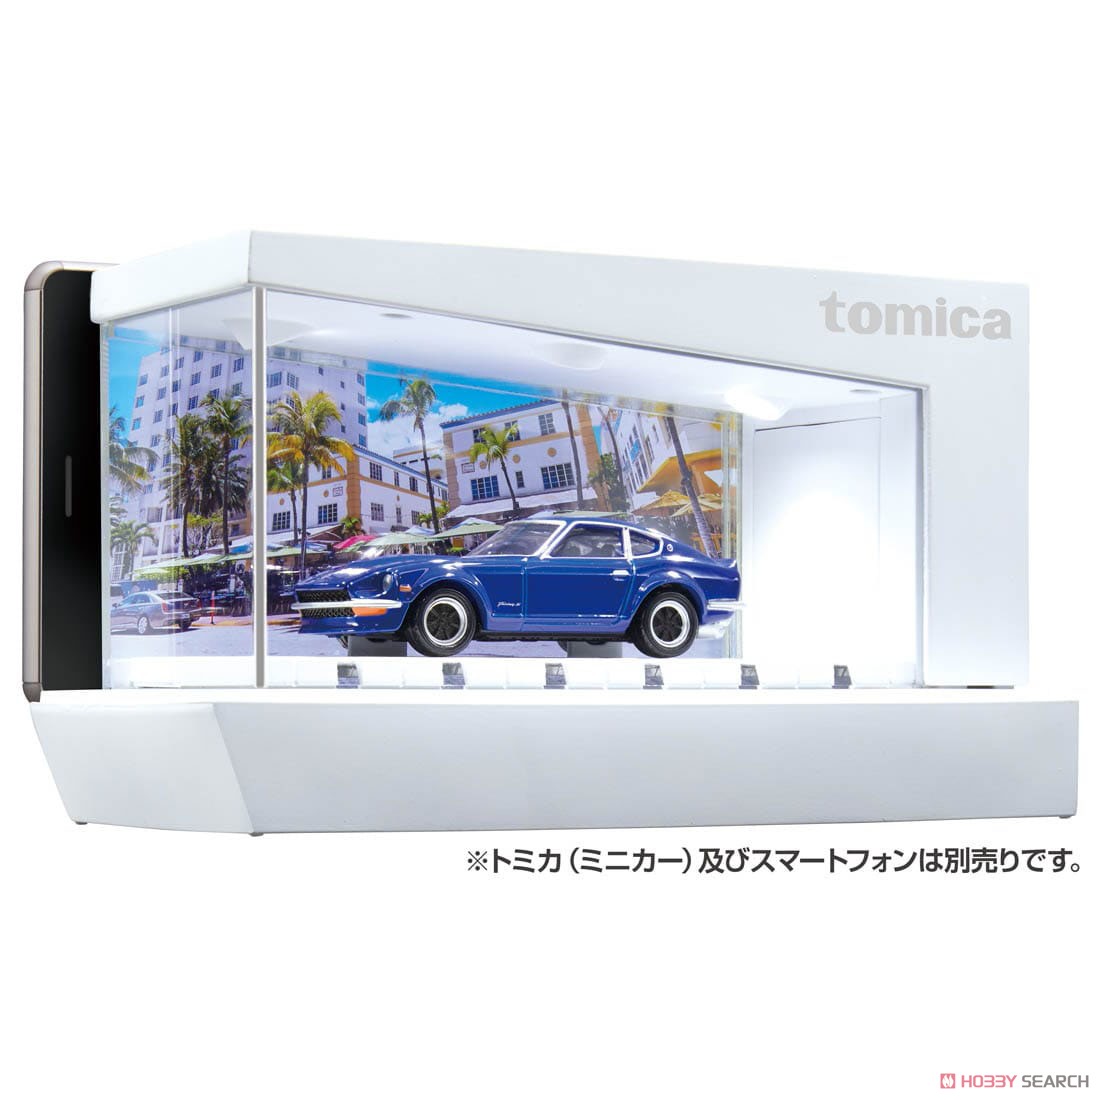 tomica ライトアップシアター クールホワイト (トミカ) その他の画像1